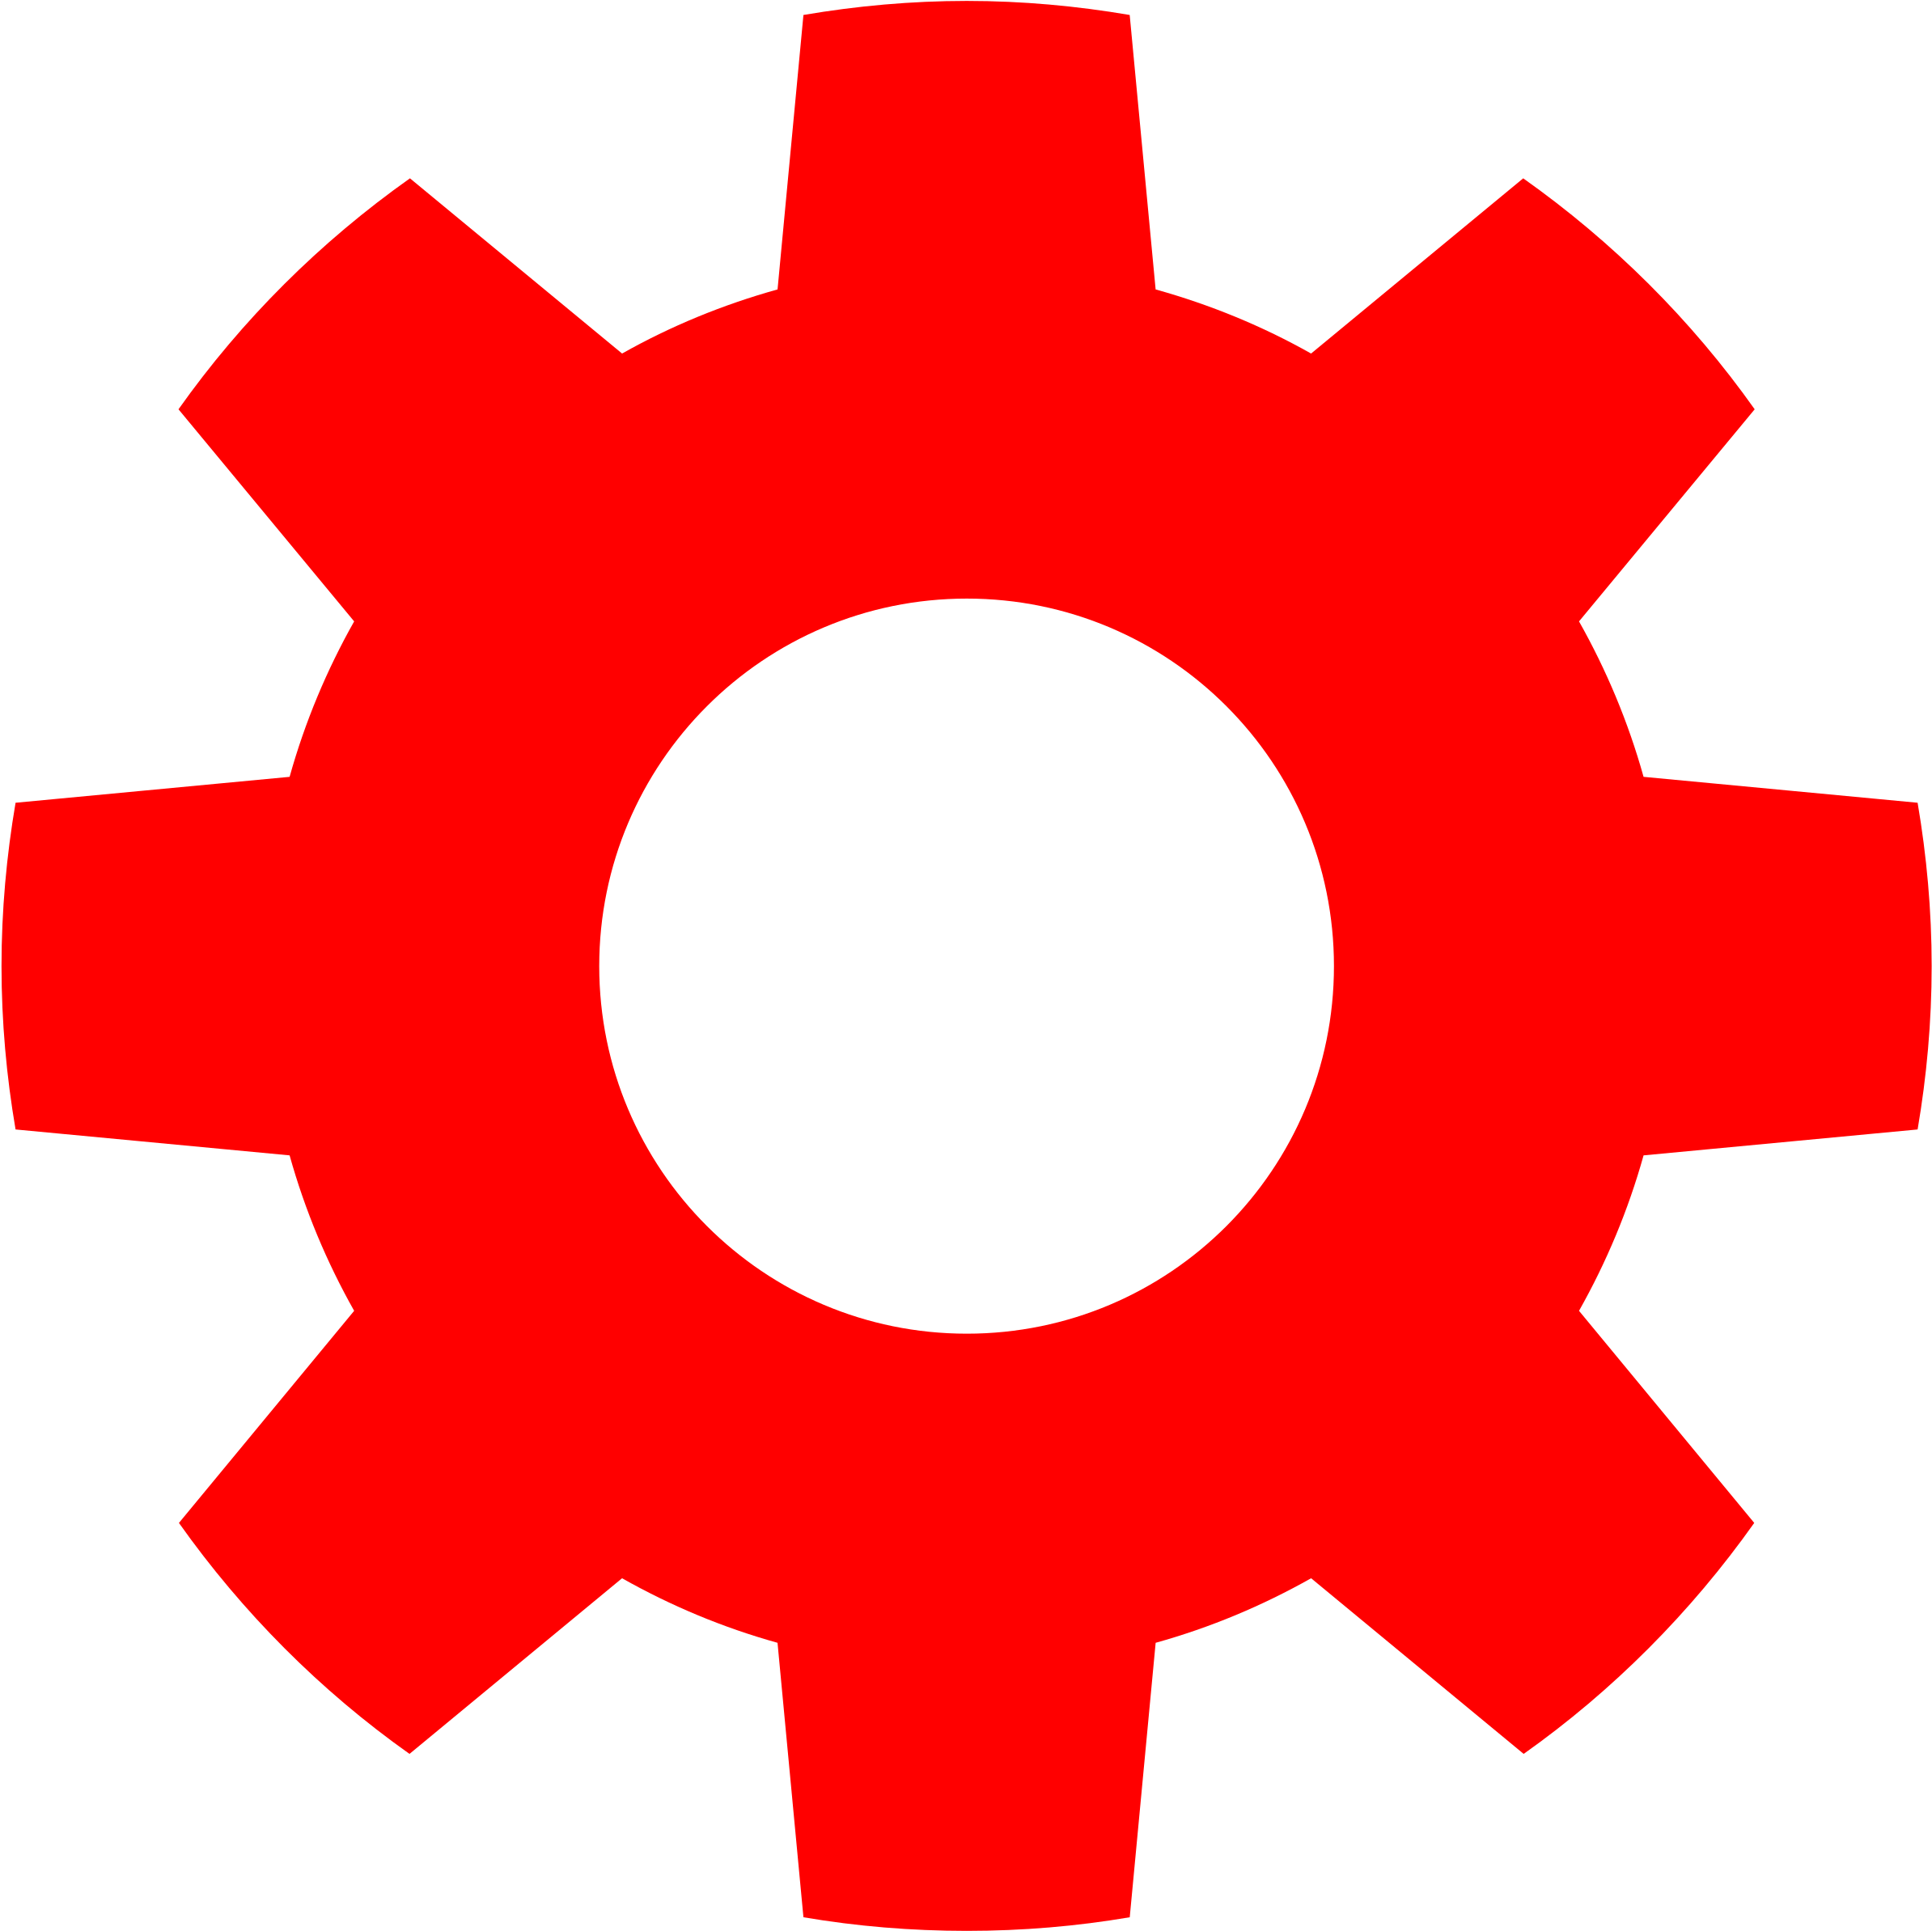 Gear Images Images Hd Download - Red Gear Icon Png (2400x2400)